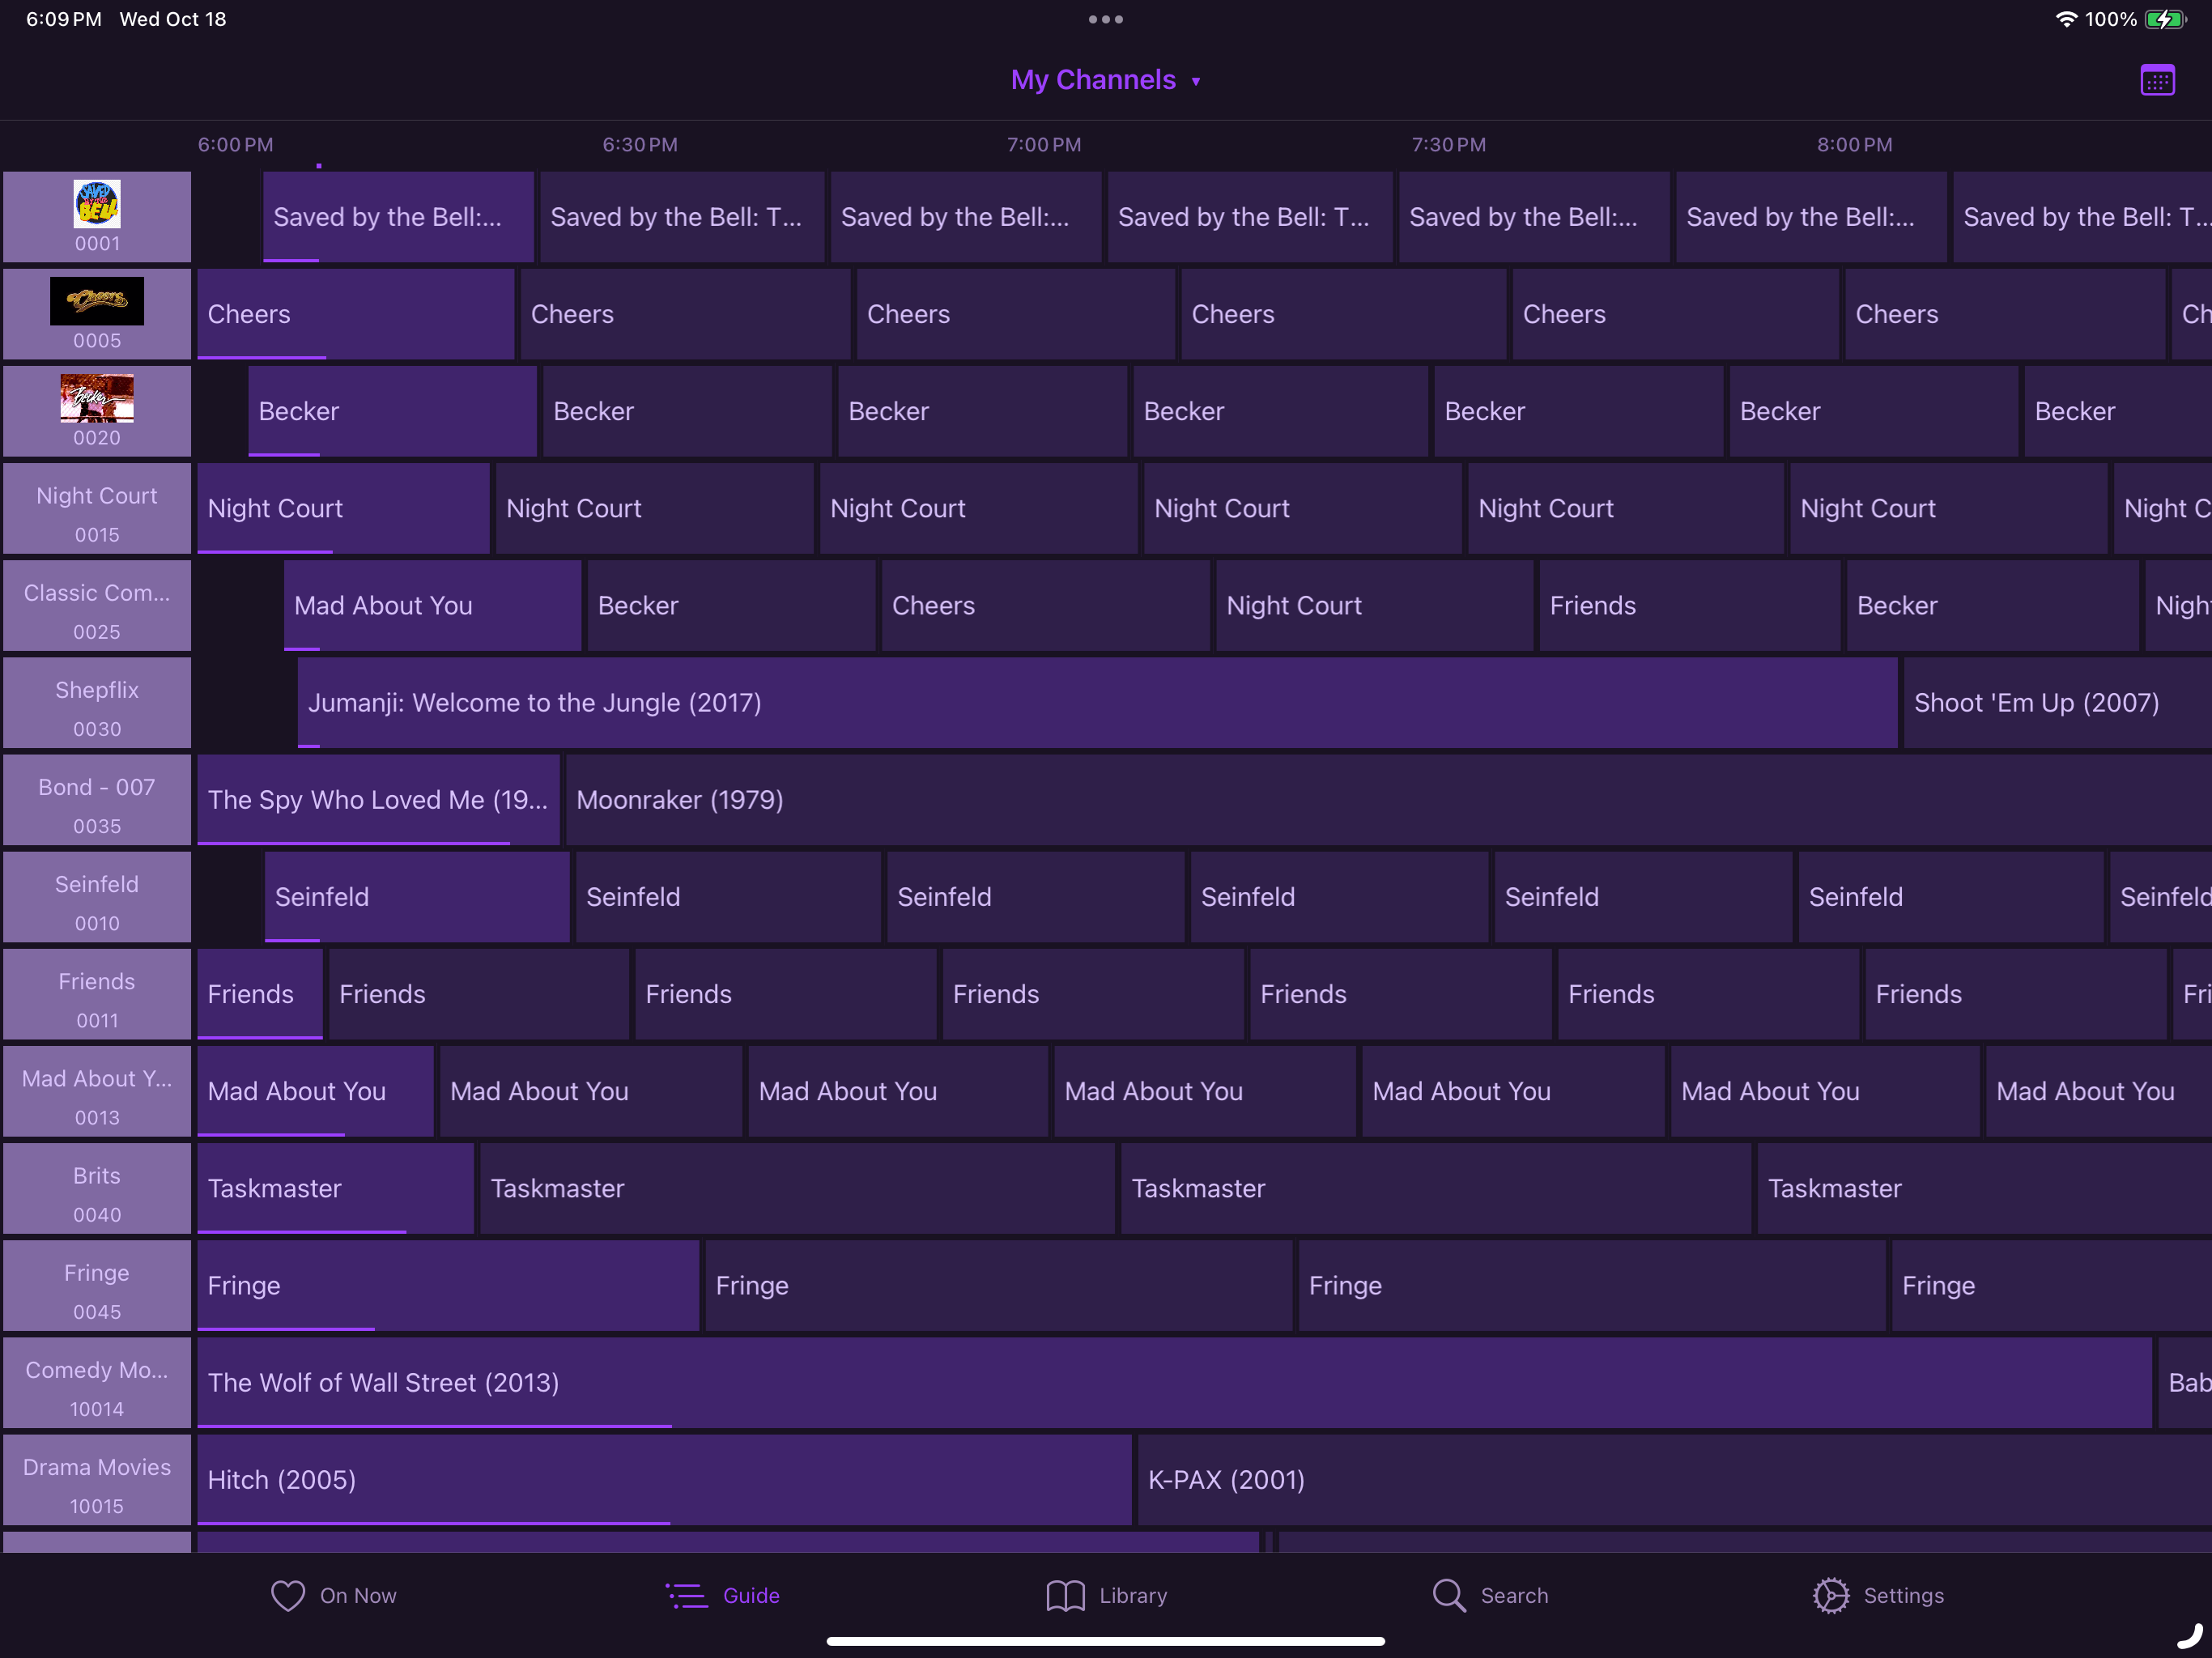 Channels screen shot showing a guide of user created television channels